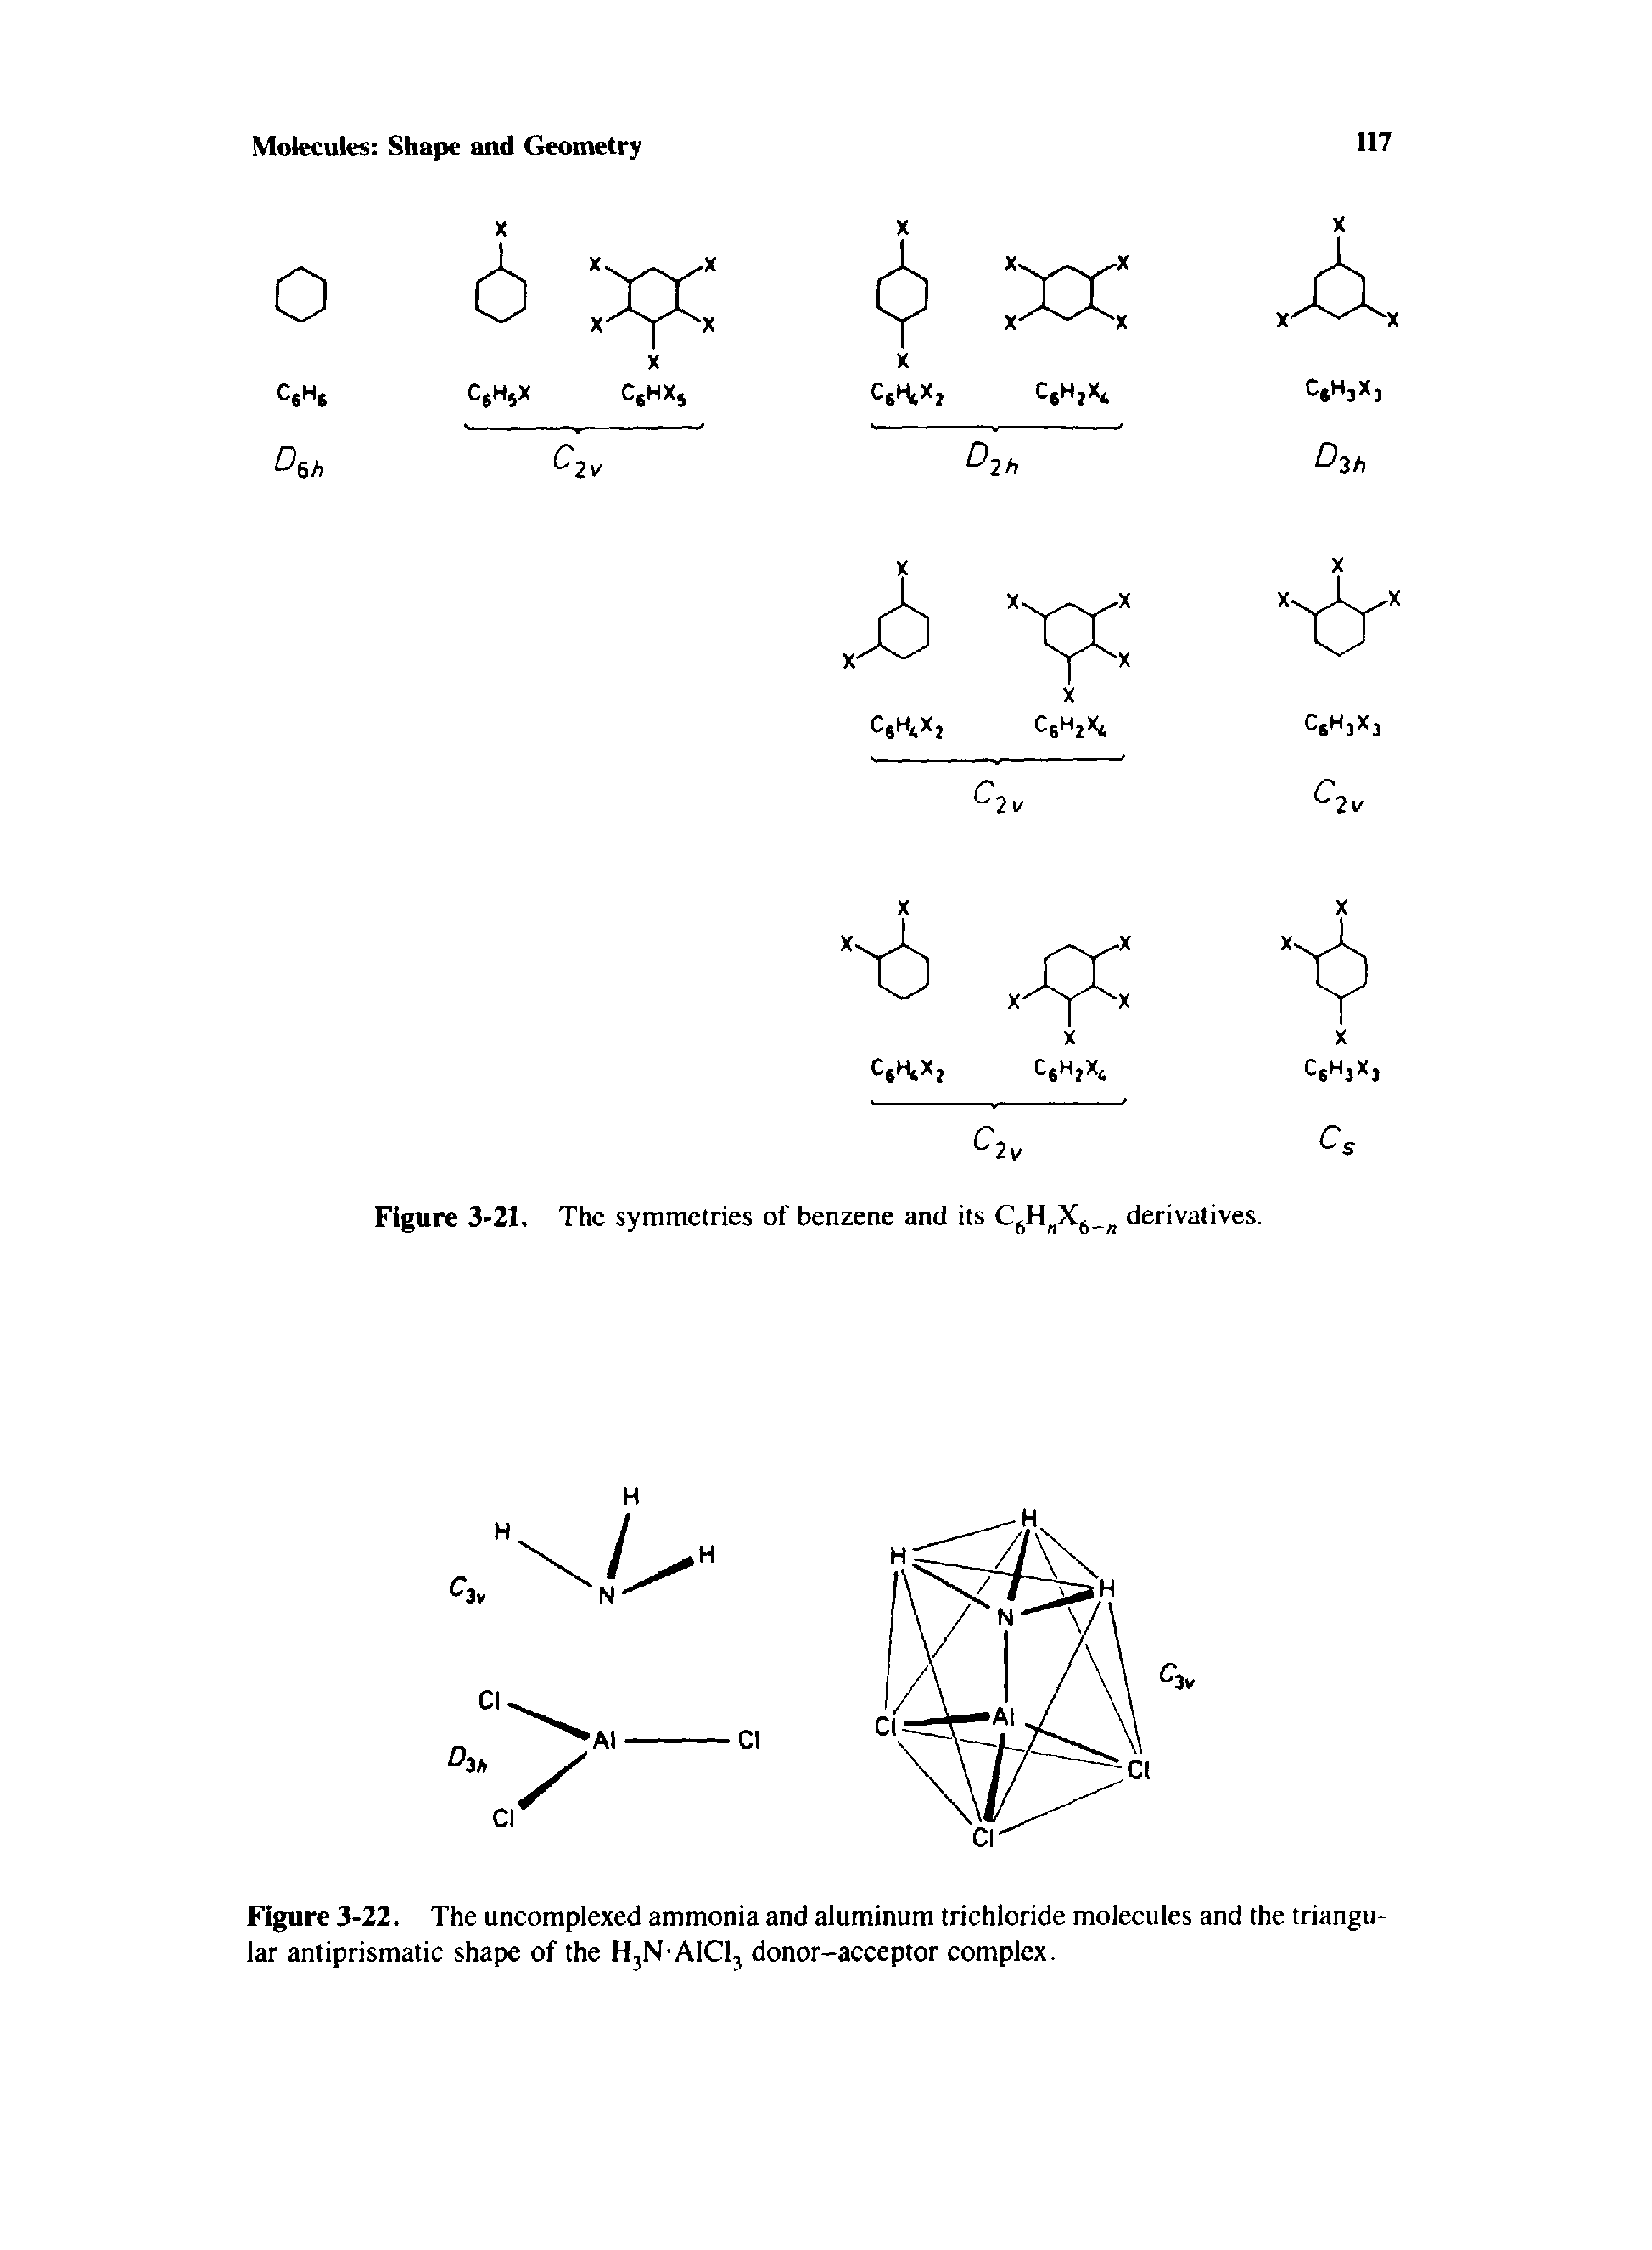 Figure 3-22. The uncomplexed ammonia and aluminum trichloride molecules and the triangular antiprismatic shape of the HjN-AlCl, donor-acceptor complex.